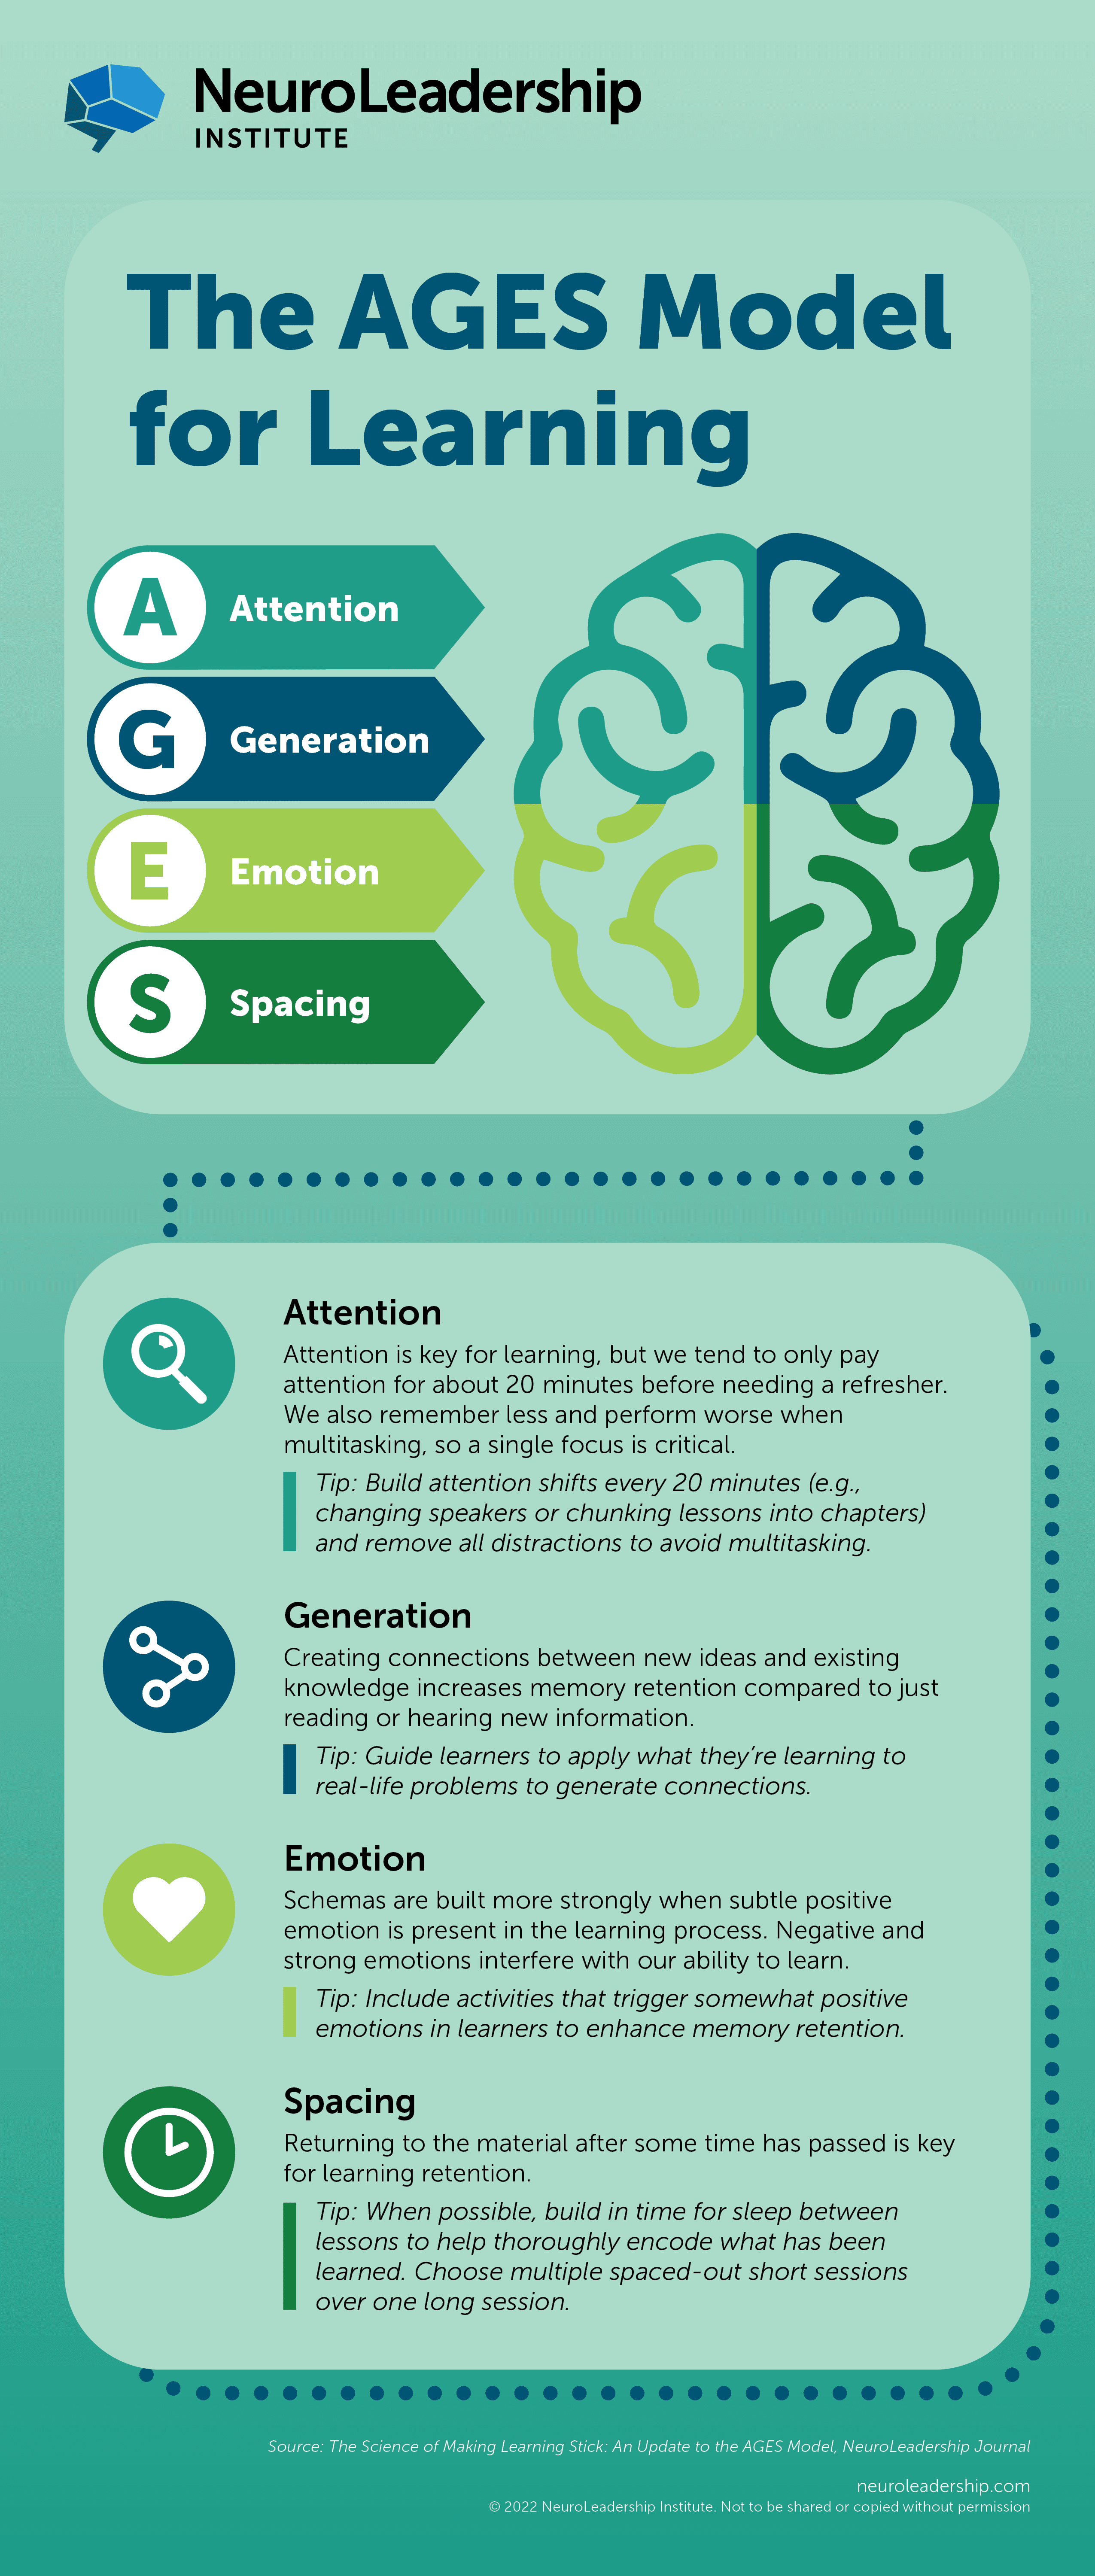 An infographic with the title “The AGES Model for Learning.” At the top of the image, the AGES acronym is broken out: attention, generation, emotion, spacing. Below that, there are four sections, one per letter, with the following information: Attention. Attention is key for learning, but we tend to only pay attention for about 20 minutes before needing a refresher. We also remember less and perform worse when multitasking, so a single focus is critical. Tip: Build attention shifts every 20 minutes (e.g., changing speakers or chunking lessons into chapters) and remove all distractions to avoid multitasking. Generation. Creating connections between new ideas and existing knowledge increases memory retention compared to just reading or hearing new information. Tip: Guide learners to apply what they’re learning to real-life problems to generate connections. Emotion. Schemas are built more strongly when subtle positive emotion is present in the learning process. Negative and strong emotions interfere with our ability to learn. Tip: Include activities that trigger somewhat positive emotions in learners to enhance memory retention. Spacing. Returning to the material after some time has passed is key for learning retention. Tip: When possible, build in time for sleep between lessons to help thoroughly encode what has been learned. Choose multiple spaced-out short sessions over one long session. At the bottom of the image, the source is listed as The Science of Making Learning Stick: An Update to the AGES Model, NeuroLeadership Journal